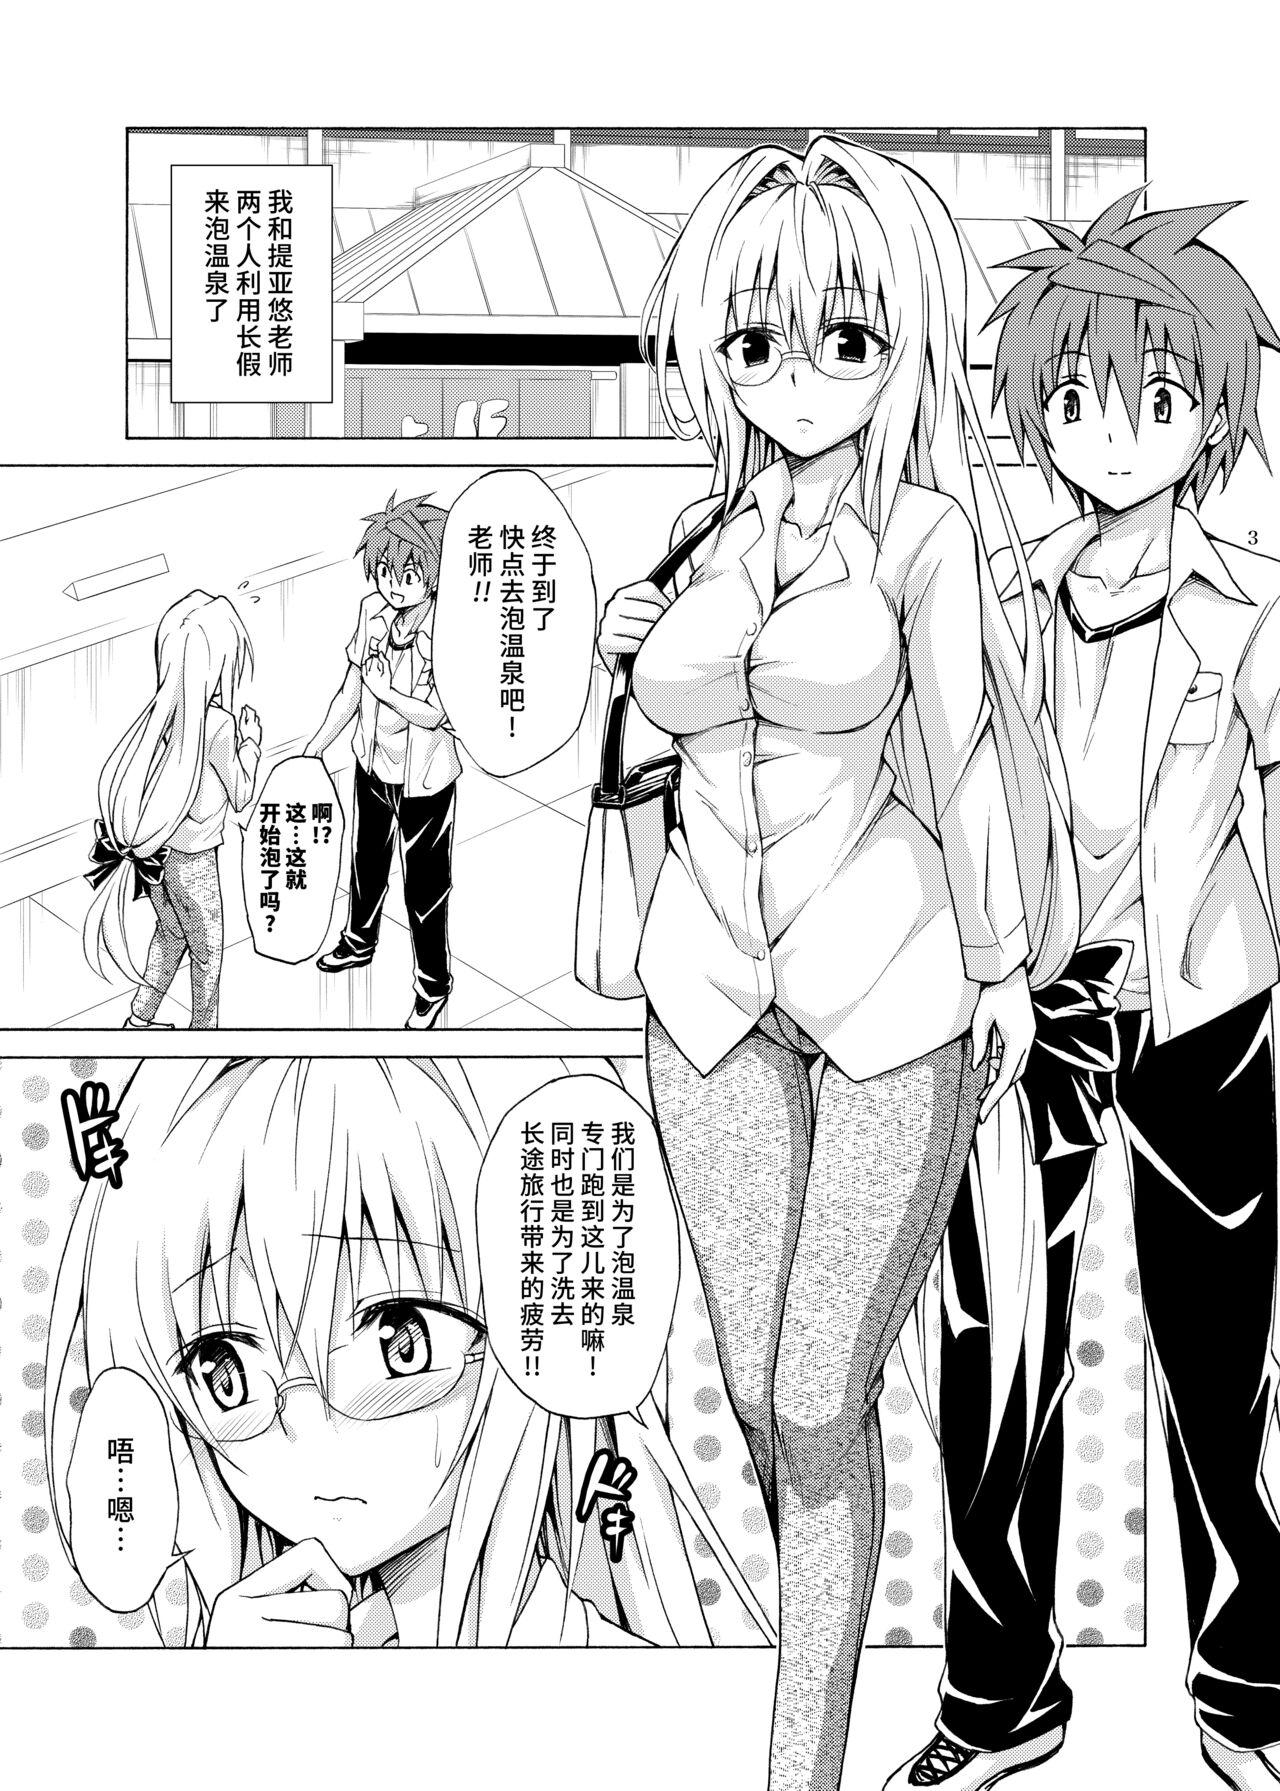 Bribe Trouble Teachers Vol. 5 - To love ru Girl Gets Fucked - Page 2